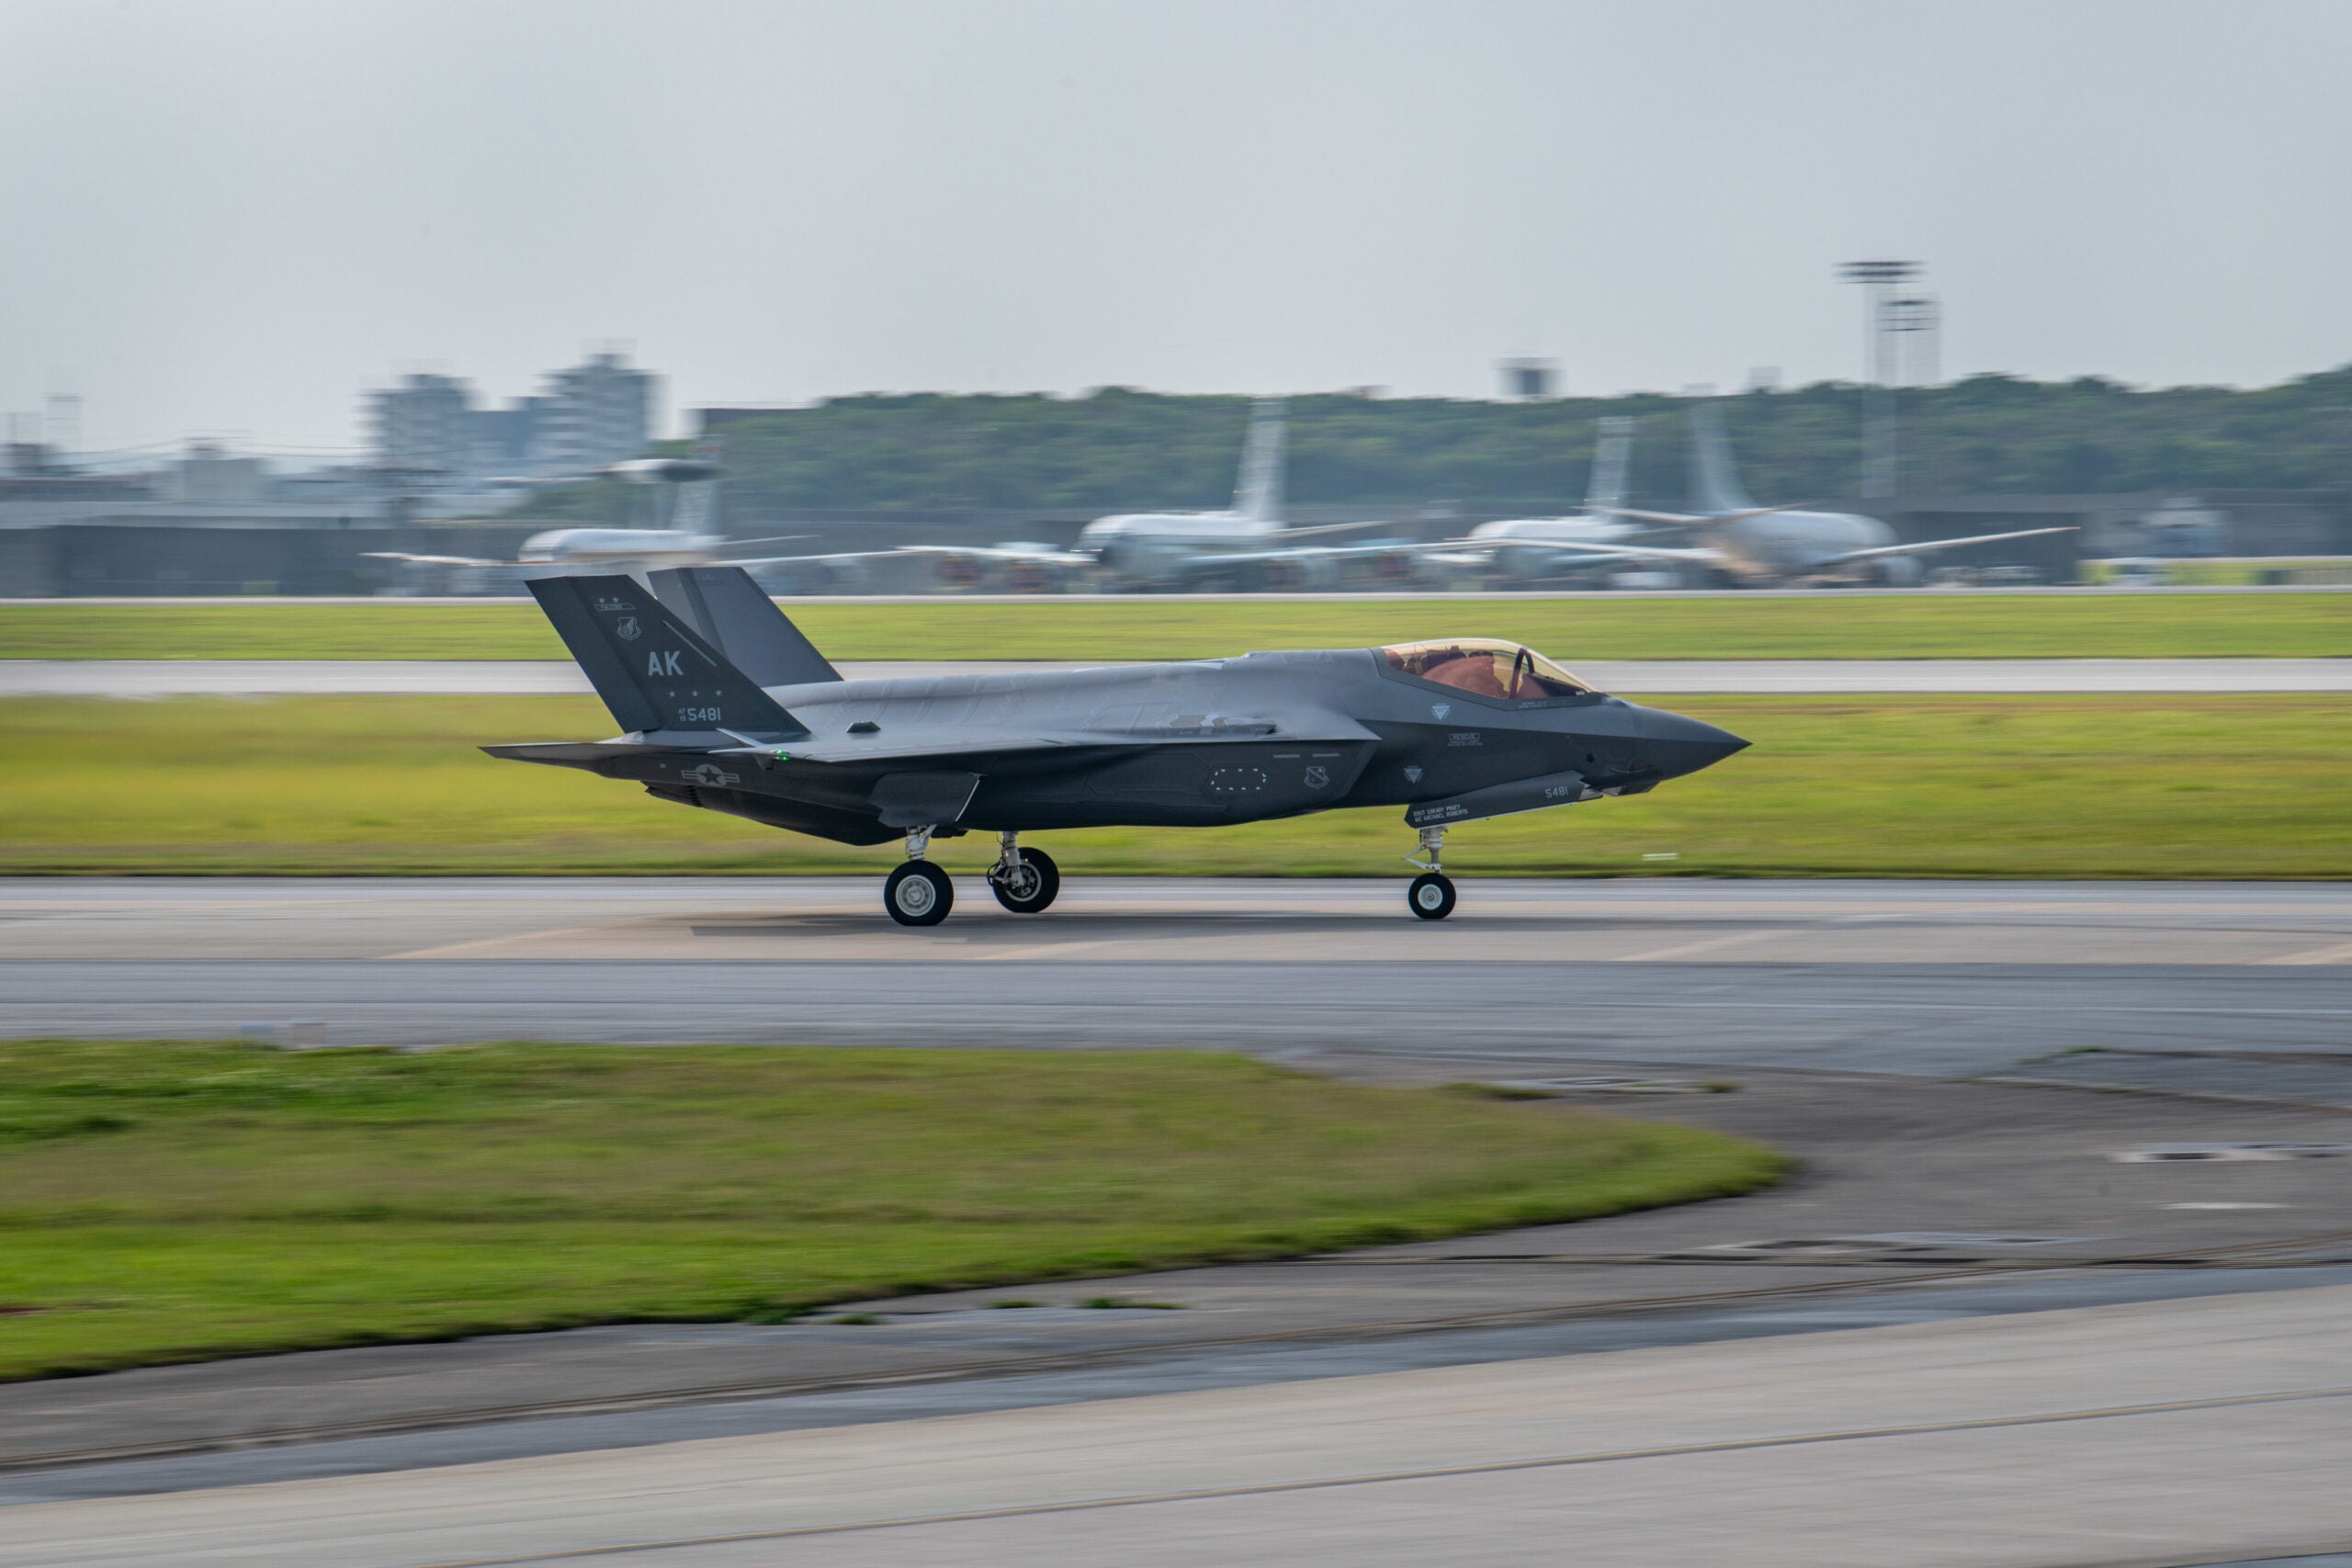 A U.S. Air Force F-35A Lightning II assigned to the 354th Fighter Wing at Eilson Air Force Base, Alaska, lands at Kadena Air Base, Japan, March 28, 2023. The F-35 is a fifth-generation fighter, combining advanced stealth with fighter speed and agility, fully fused sensor information, network-enabled operations and advanced sustainment. (U.S. Air Force photo by Airman 1st Class Alexis Redin)